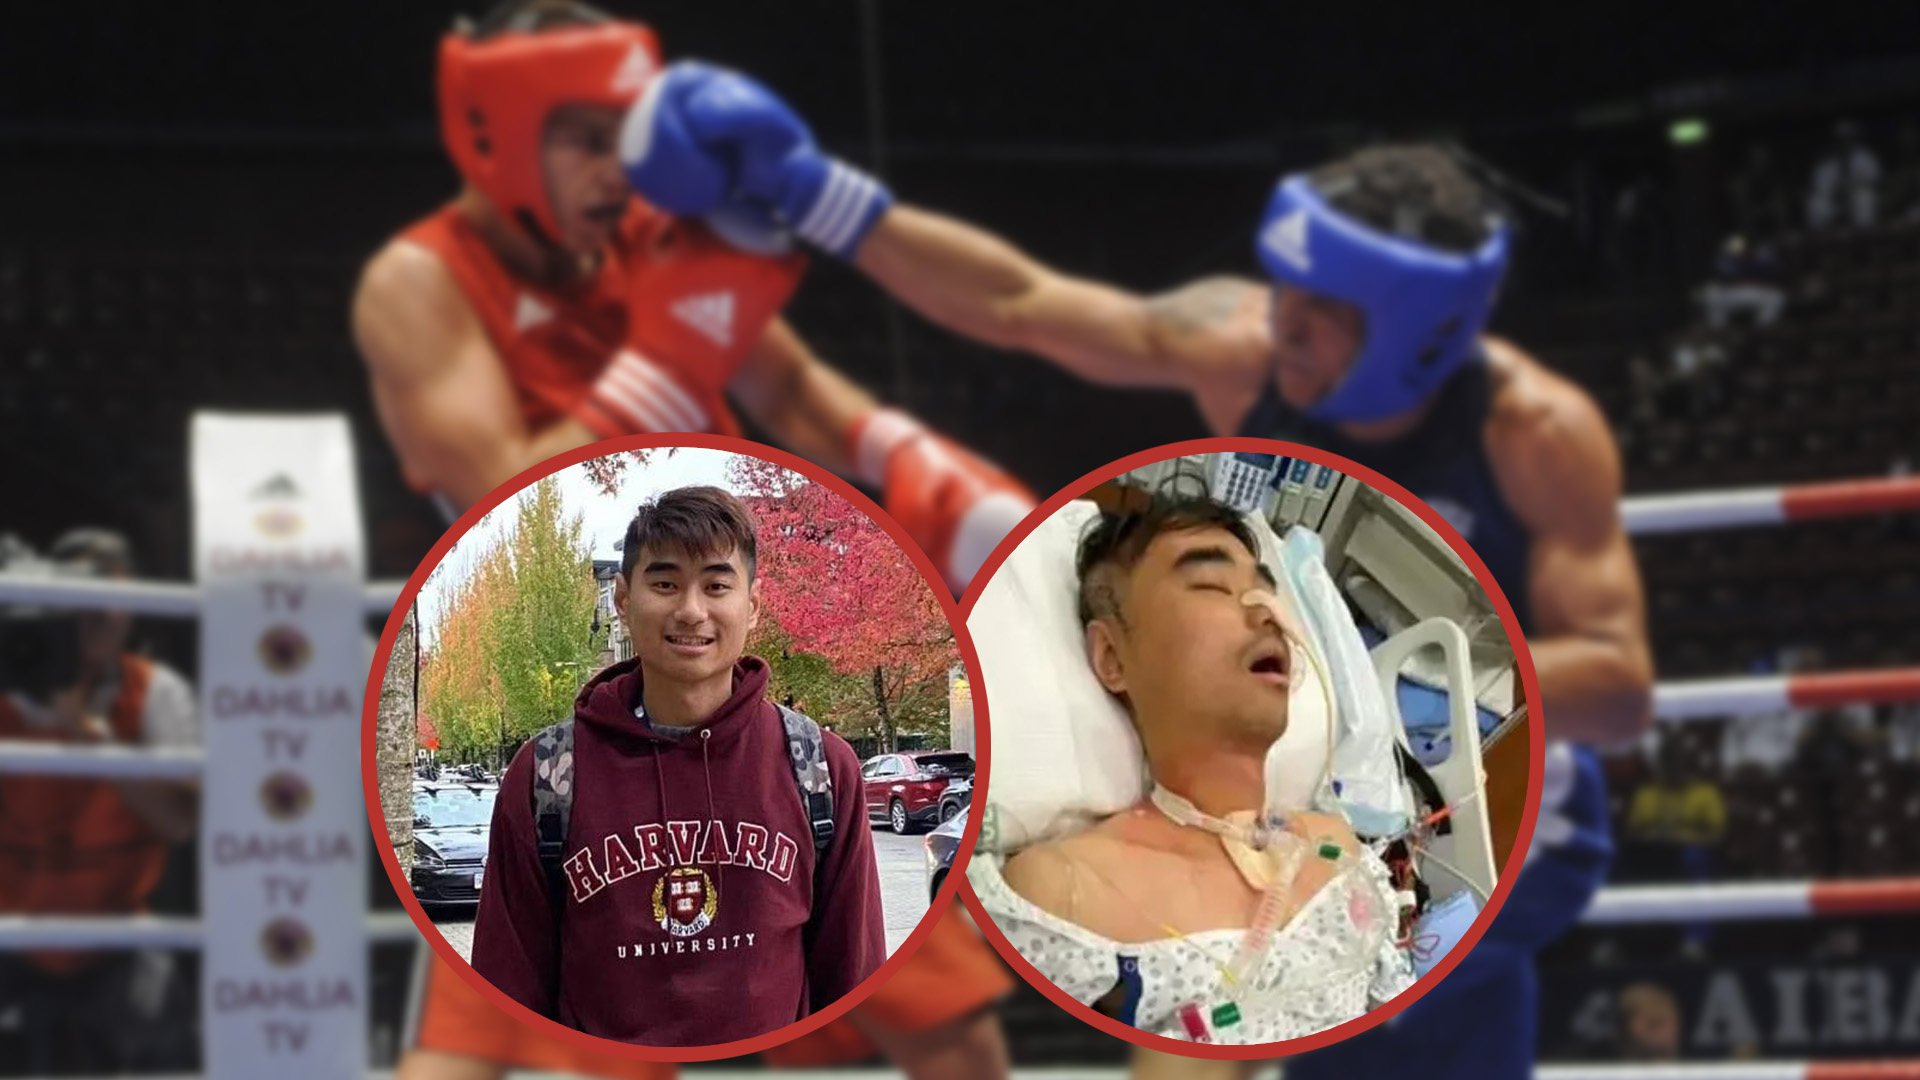 A young man from China pursuing a doctorate degree at a Canadian university suffered a brain damage after a kickboxing match. Photo: SCMP composite/Shutterstock/GoFundMe